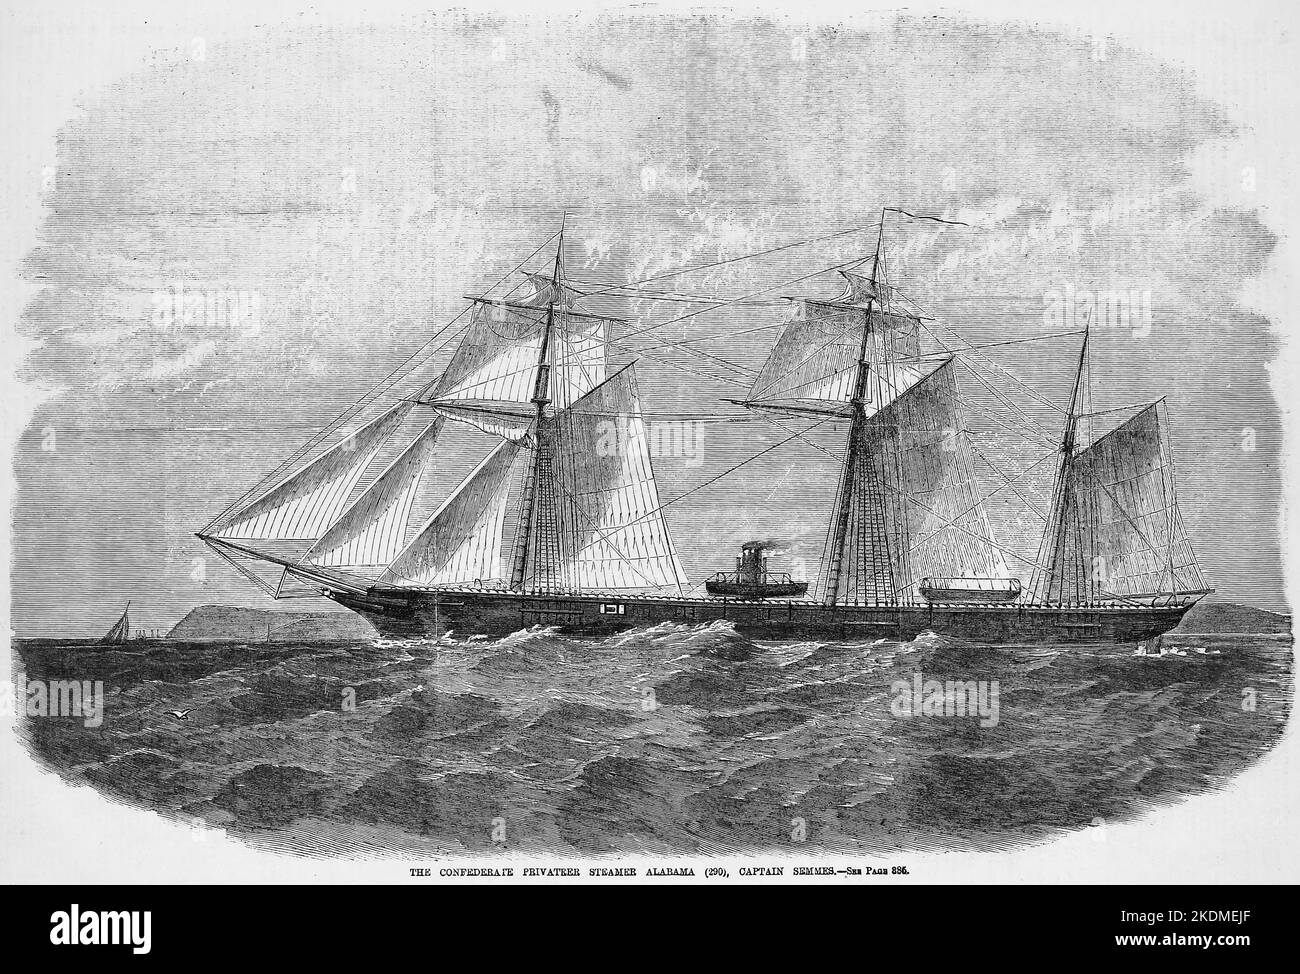 The Confederate privateer steamer Alabama, Captain Raphael Semmes. March 1863. 19th century American Civil War illustration from Frank Leslie's Illustrated Newspaper Stock Photo